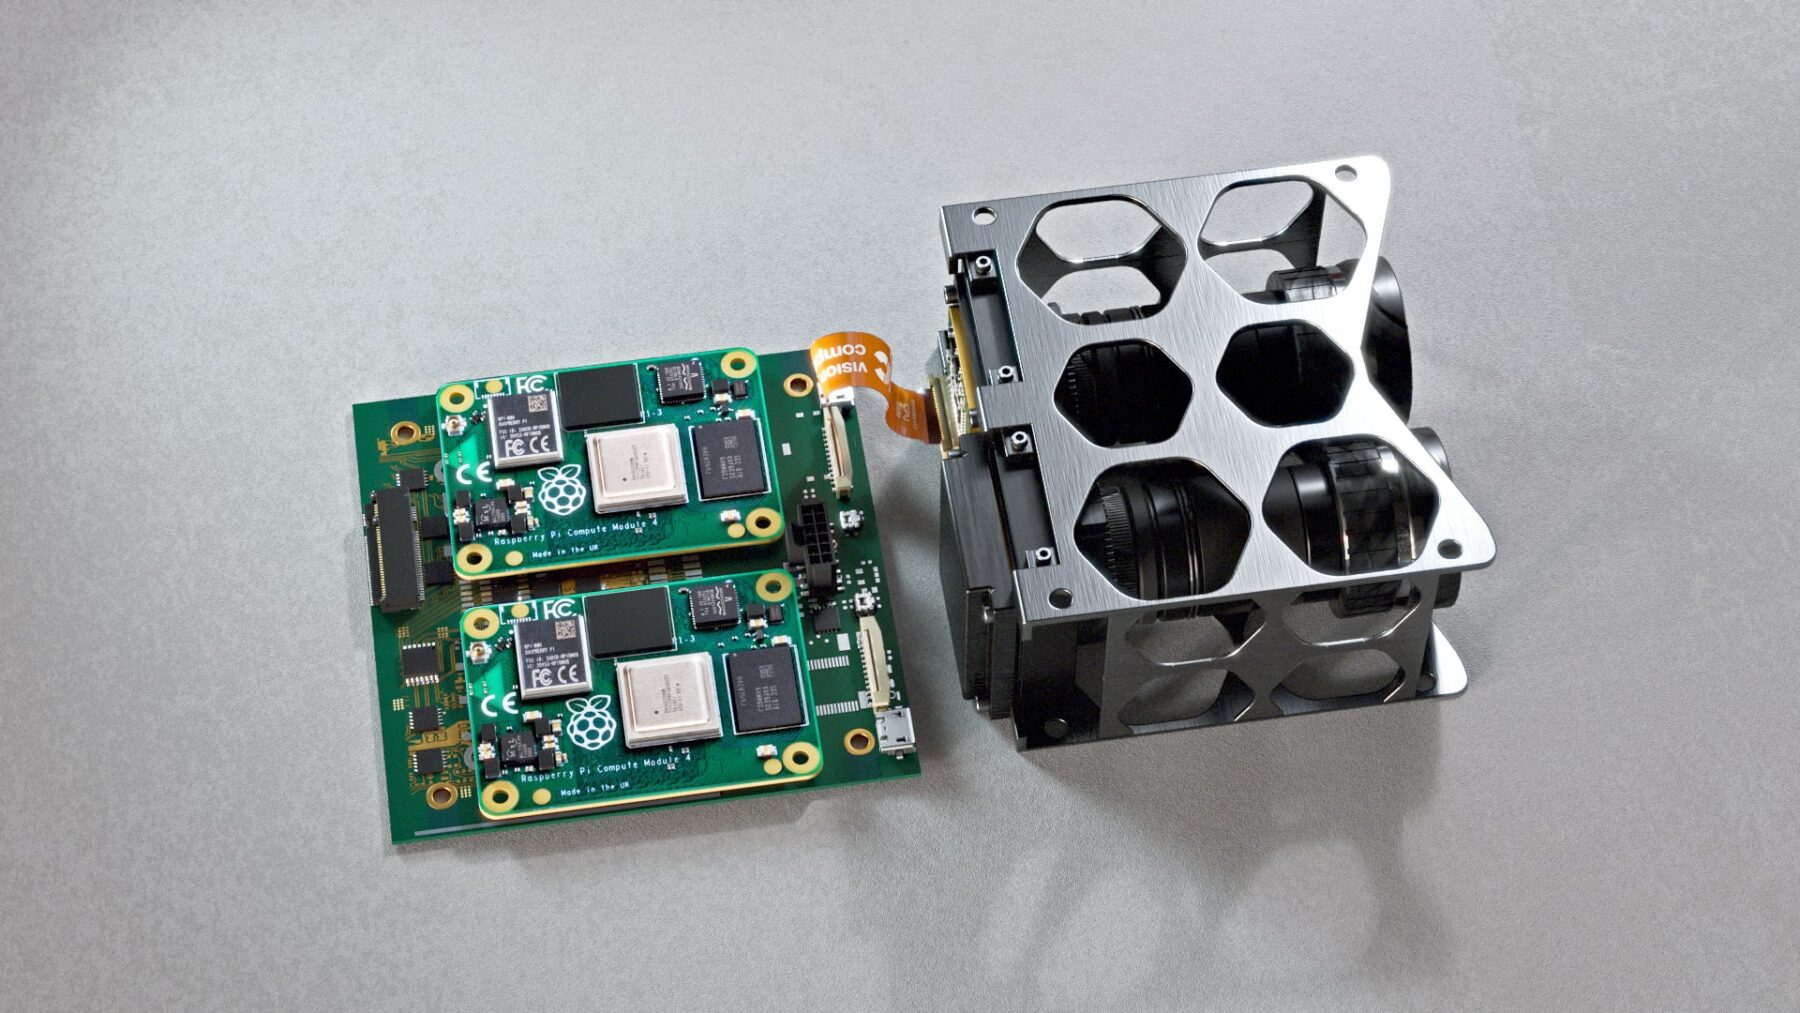 Space camera with VC MIPI cameras and Raspberry Pi boards